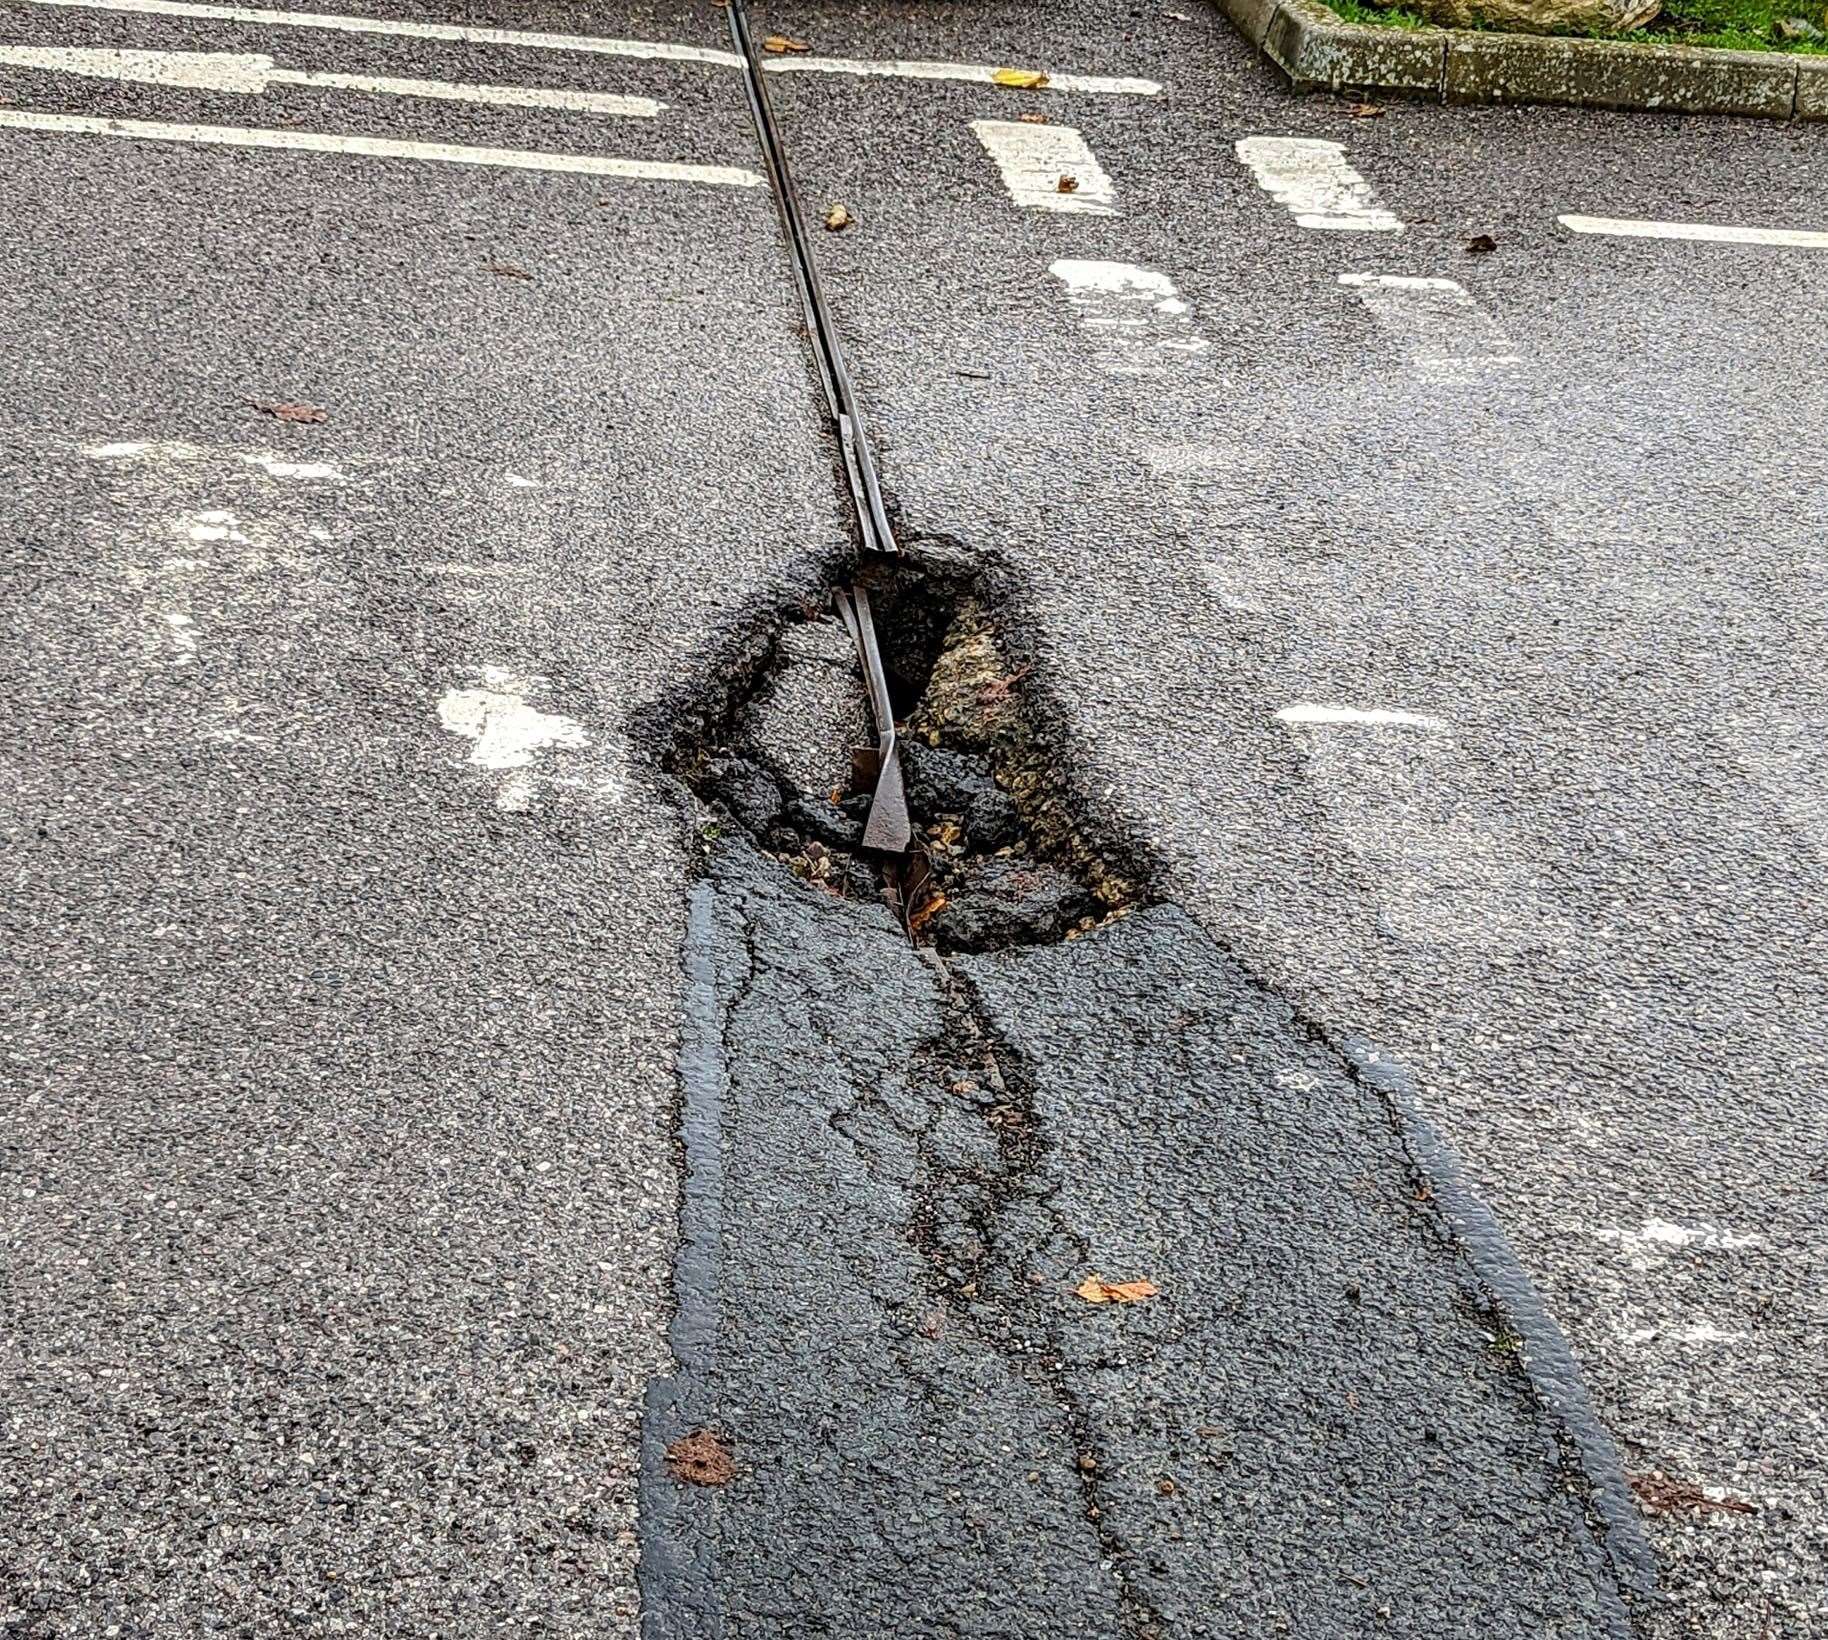 The pothole has opened up at the retail park's exit point